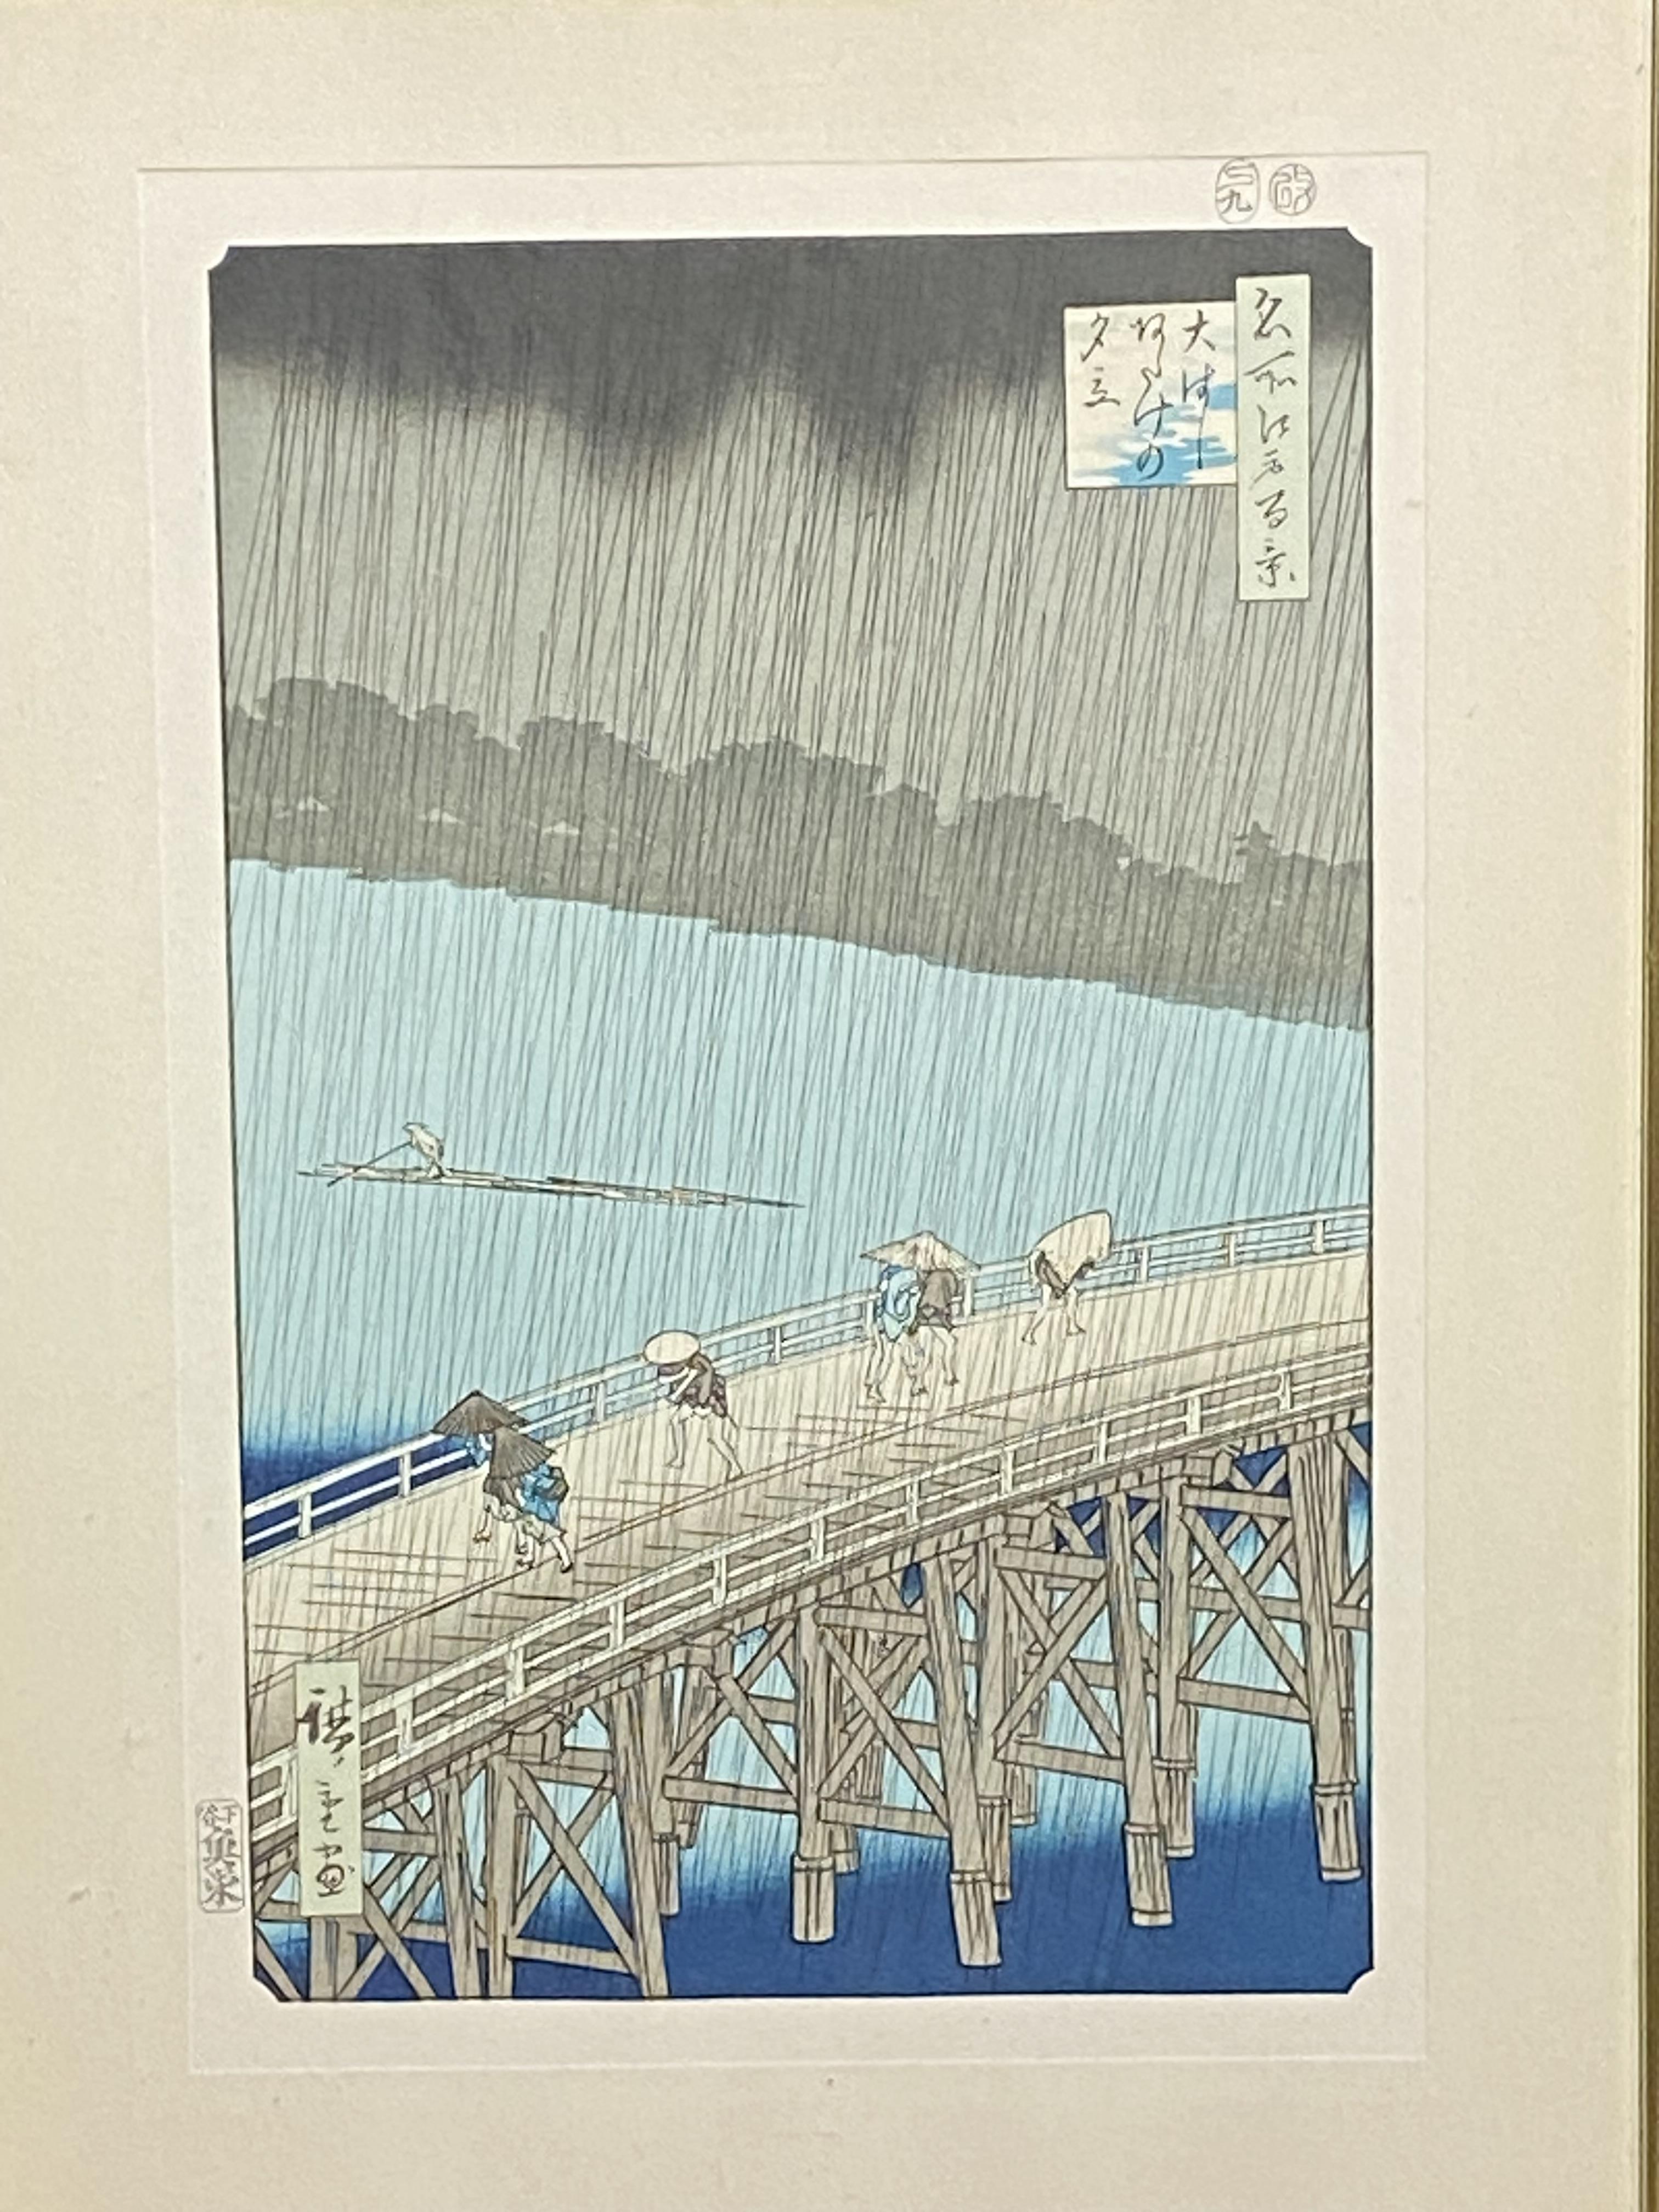 Framed and glazed Japanese woodblock print - Image 4 of 5